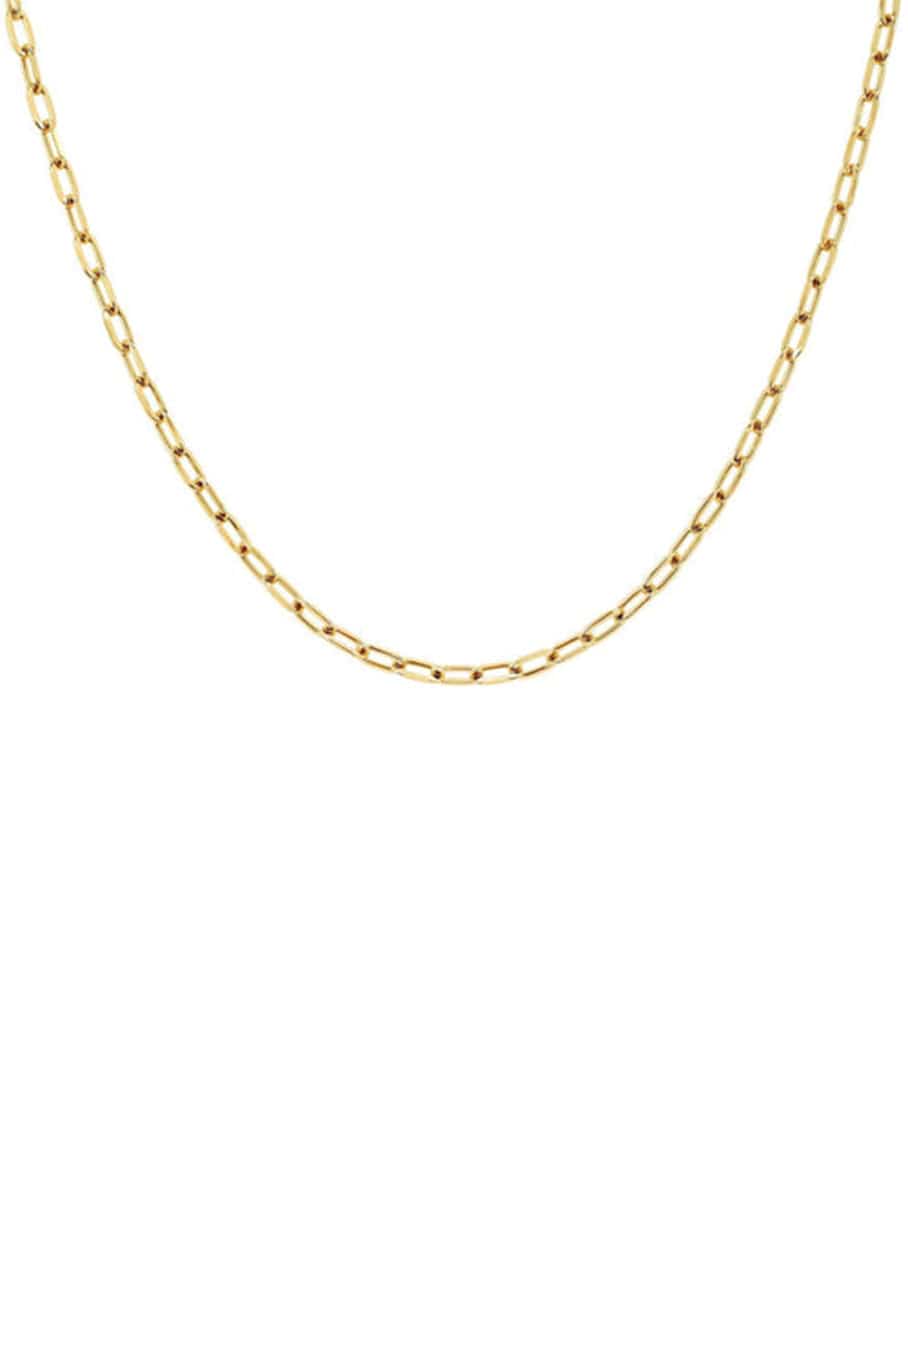 EF COLLECTION-Mini Link Necklace-YELLOW GOLD